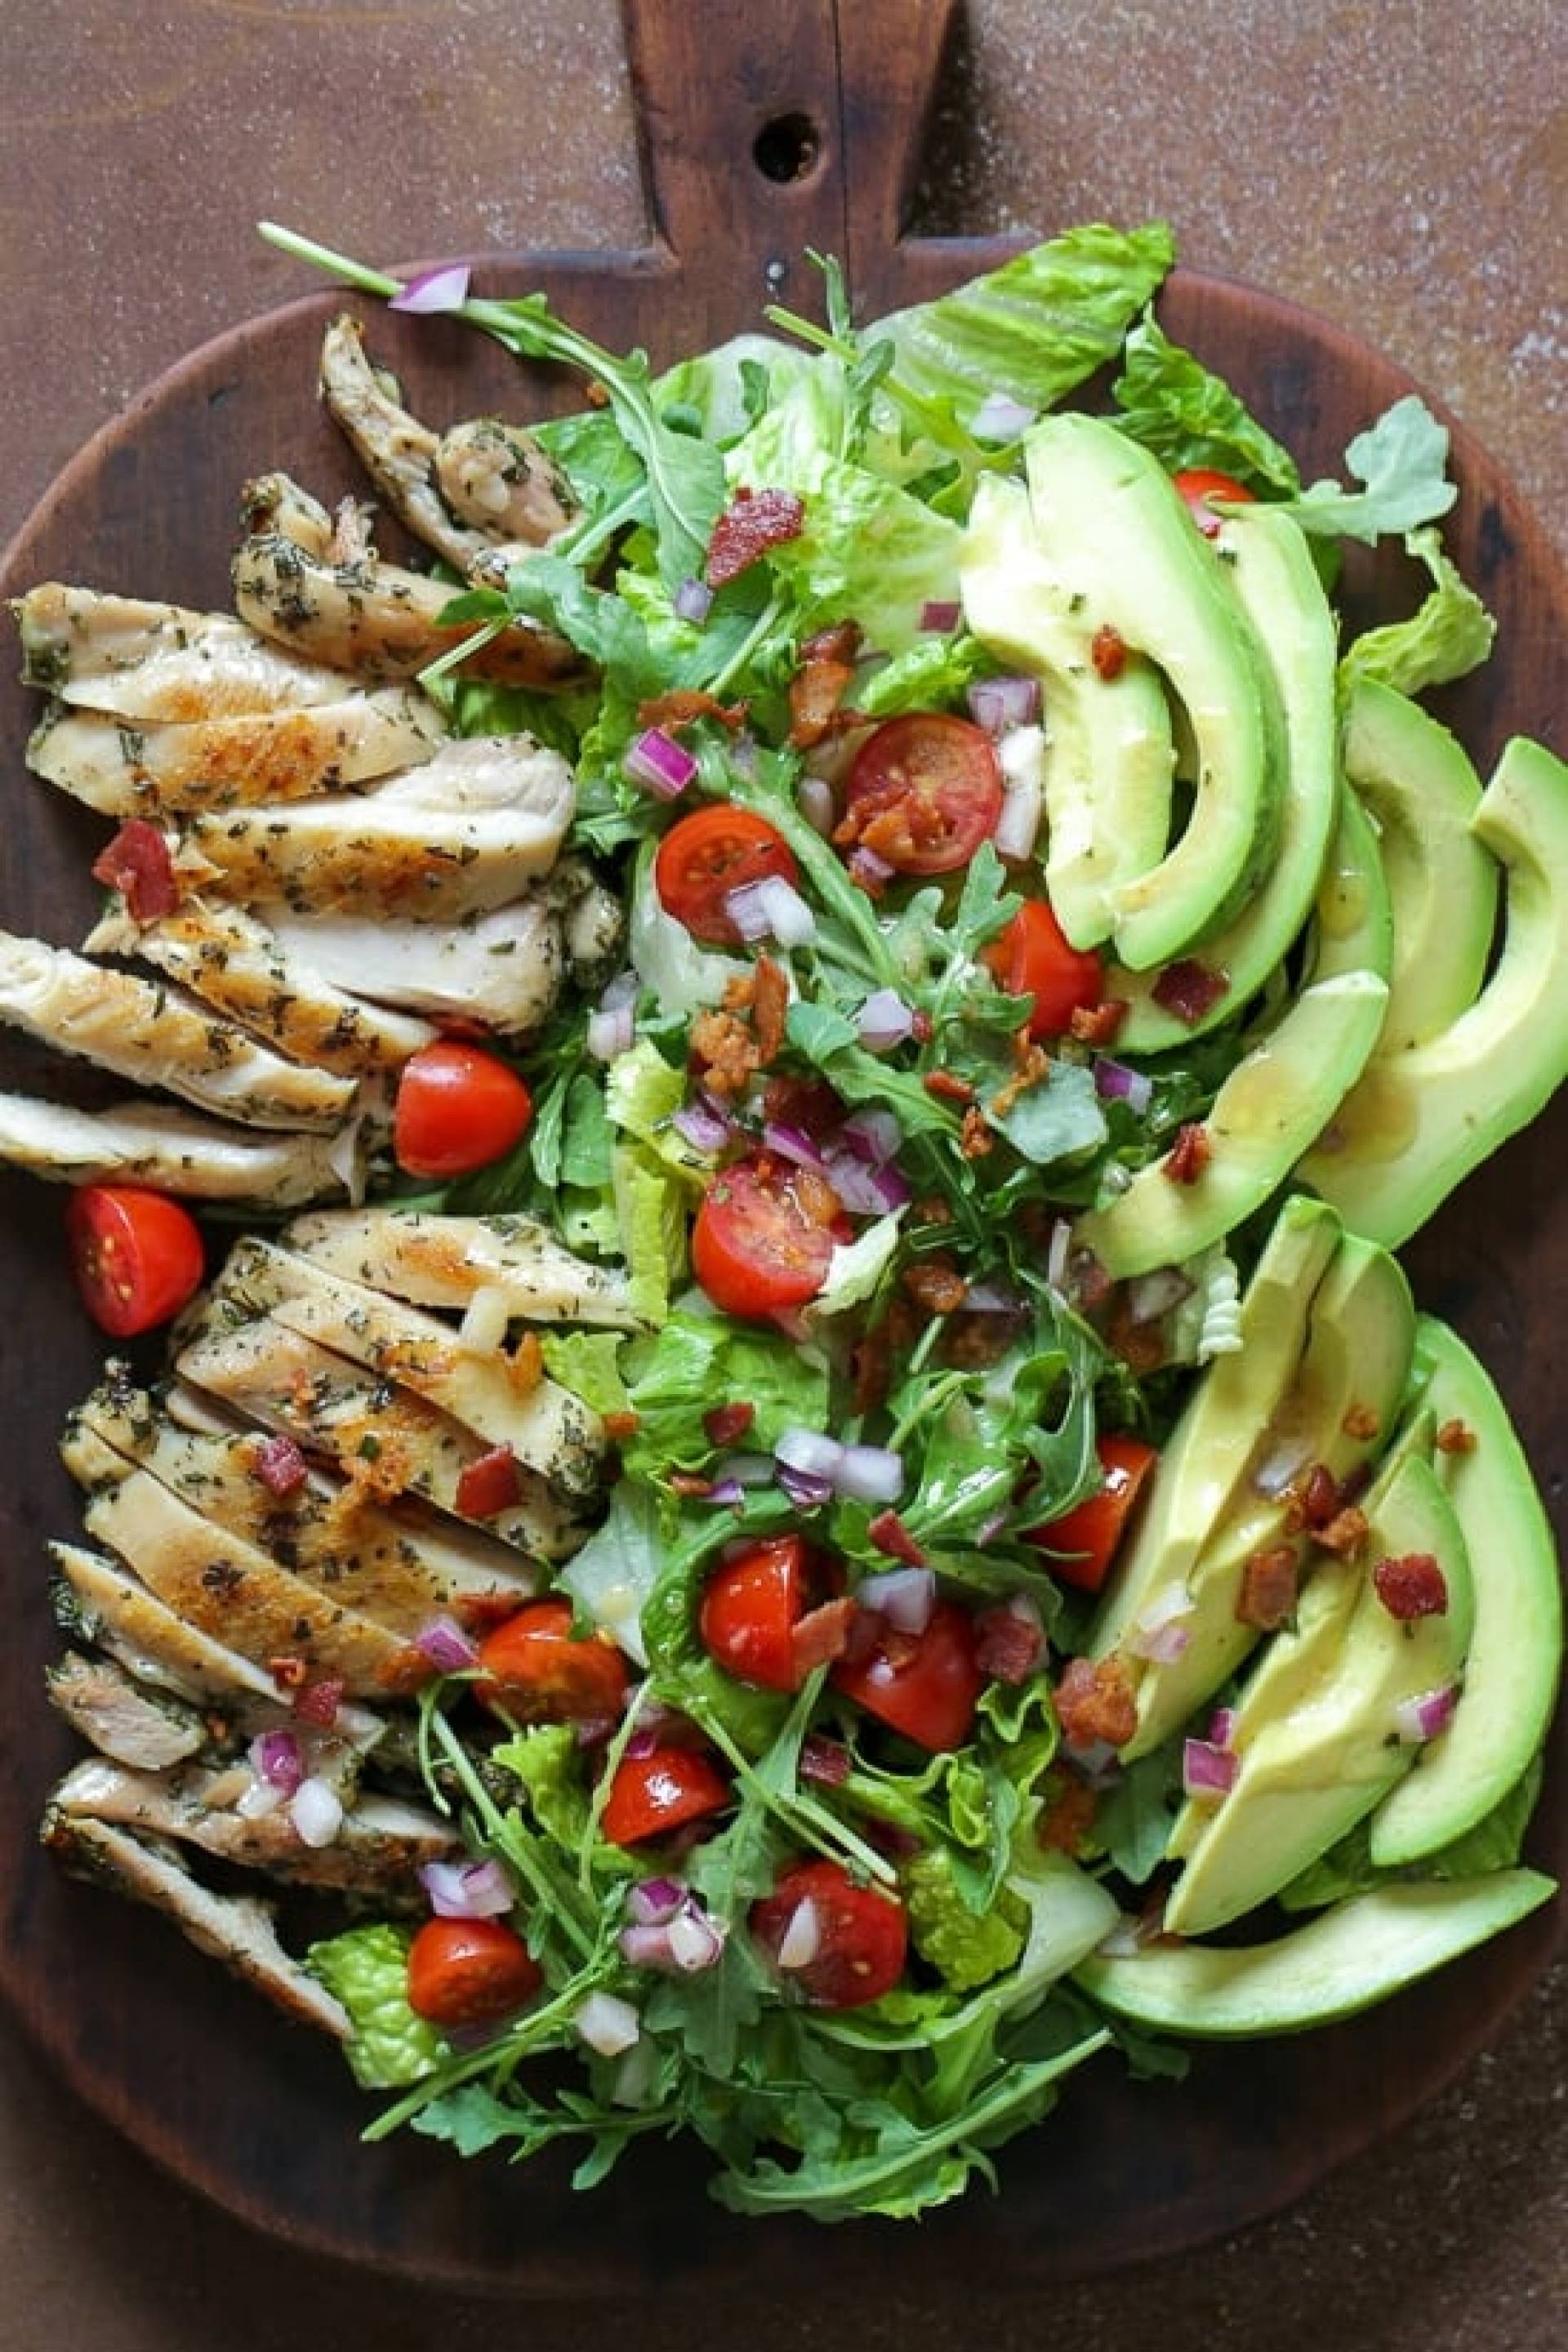 Rosemary Chicken Salad with Avocado and Bacon